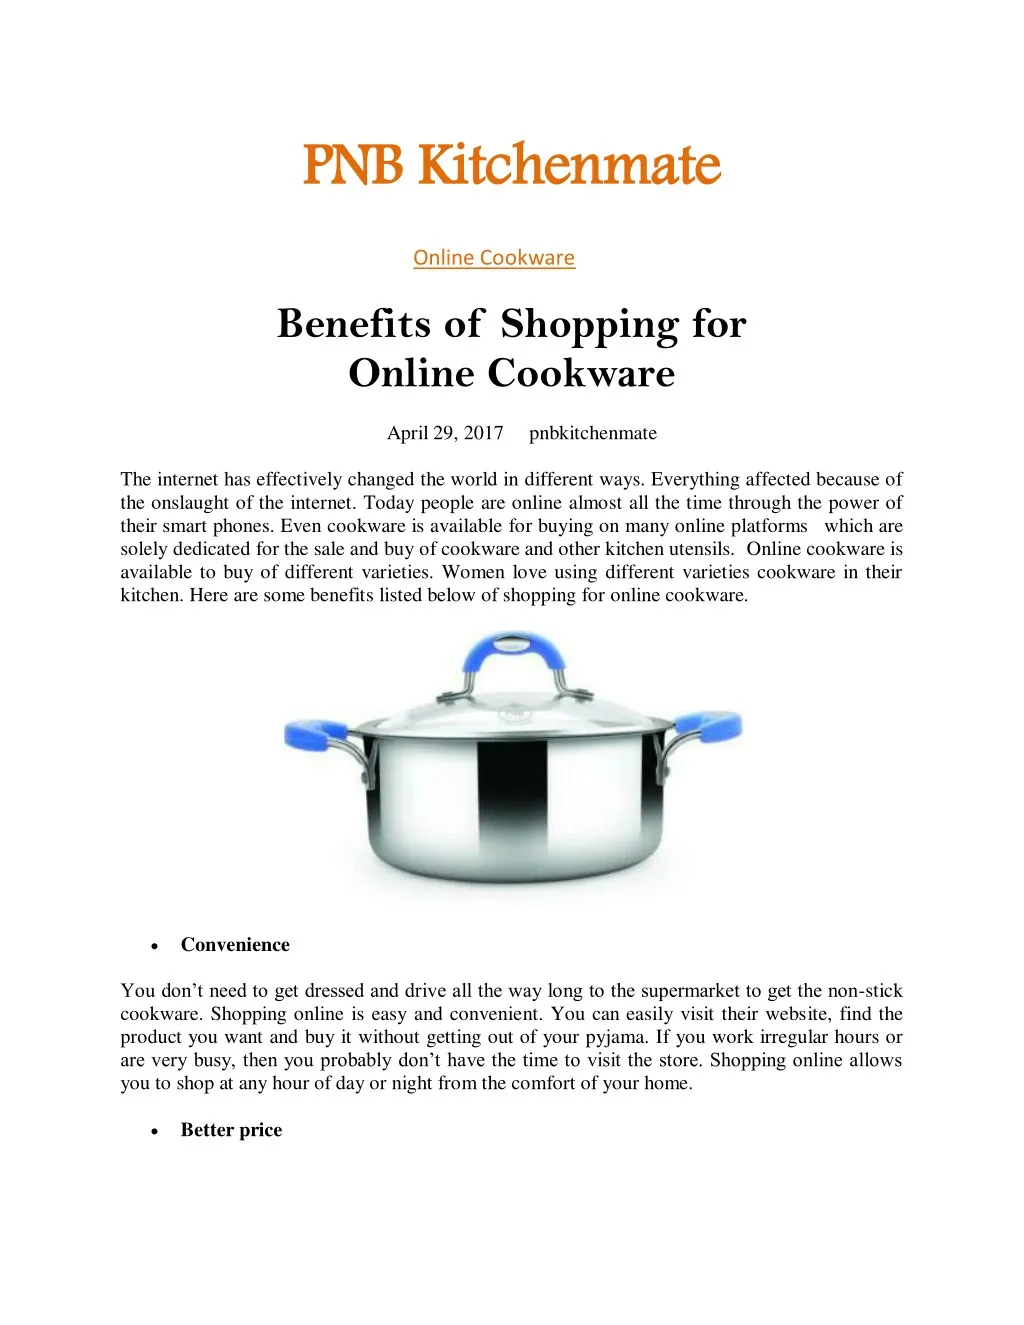 pnb kitchenmate benefits of shopping for online